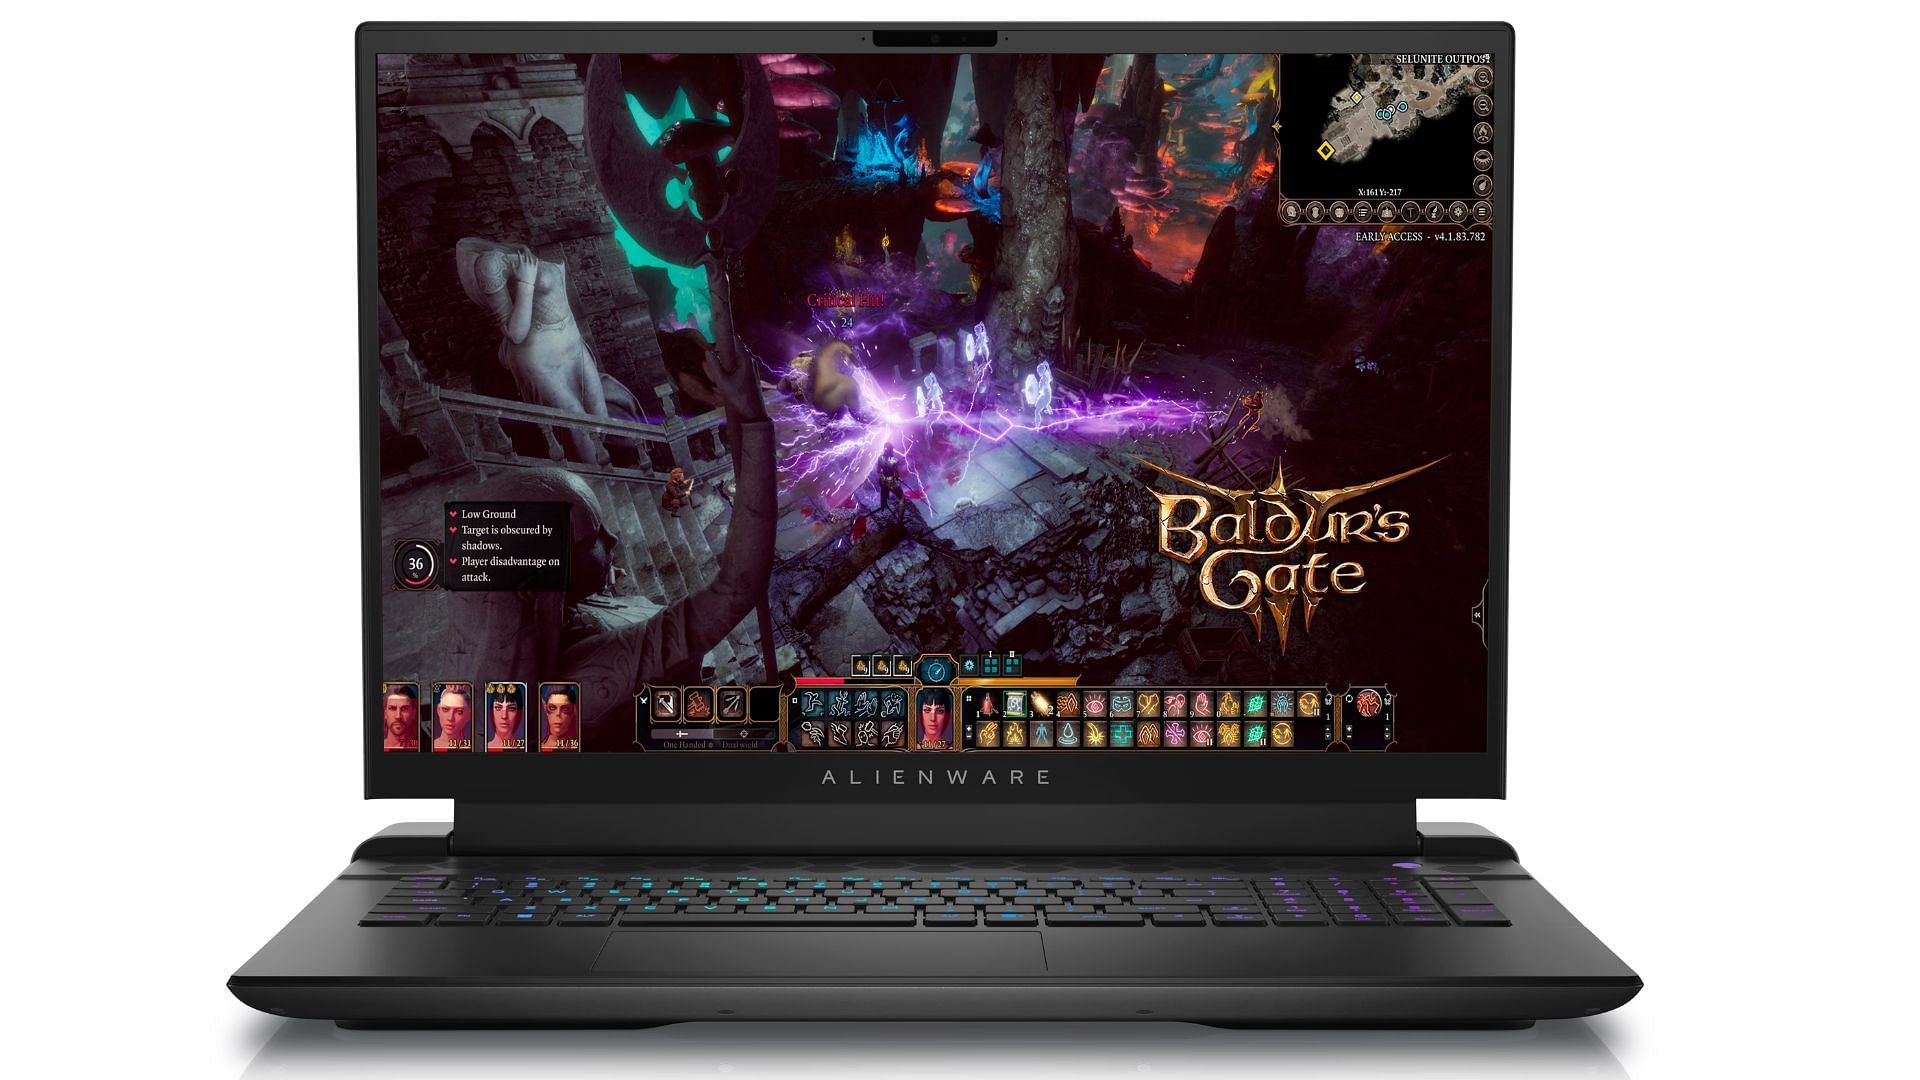 Alienware line-up offers the best Dell gaming laptops (Image via Dell)